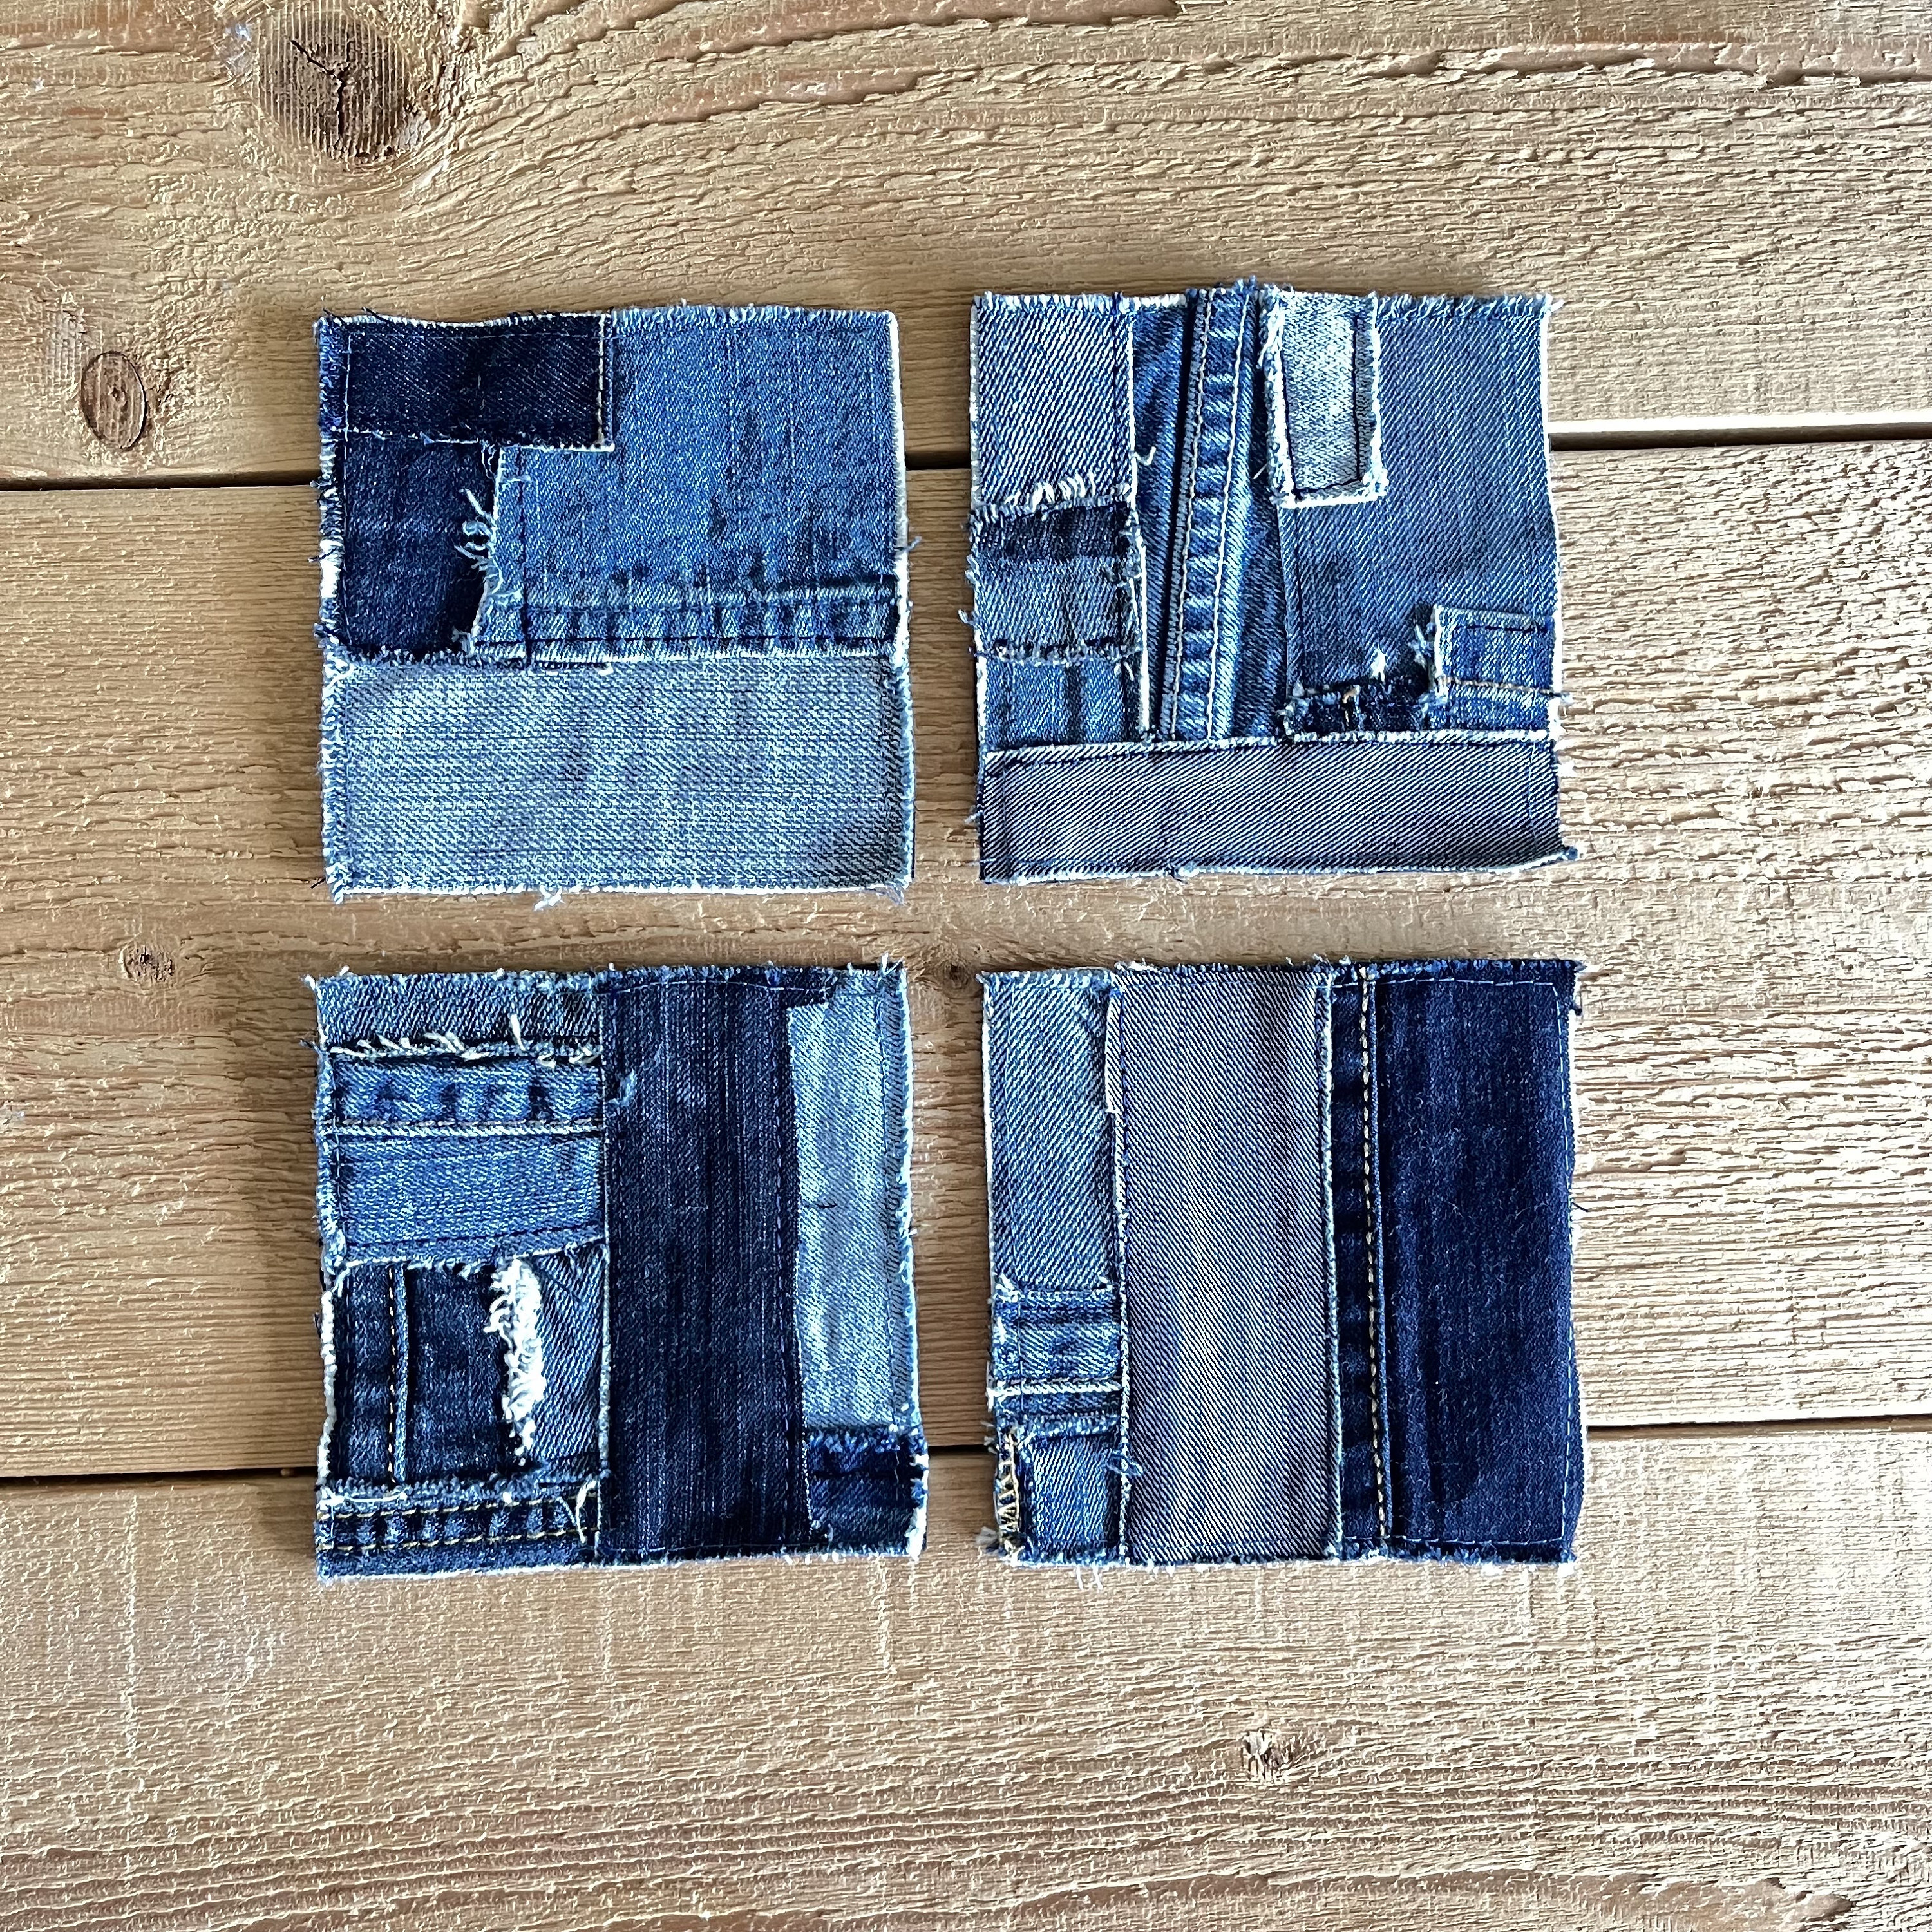 Denim Iron-on Patch, Dark Blue, Light Blue, Jeans, Sewing Supply, Care &  Repair 